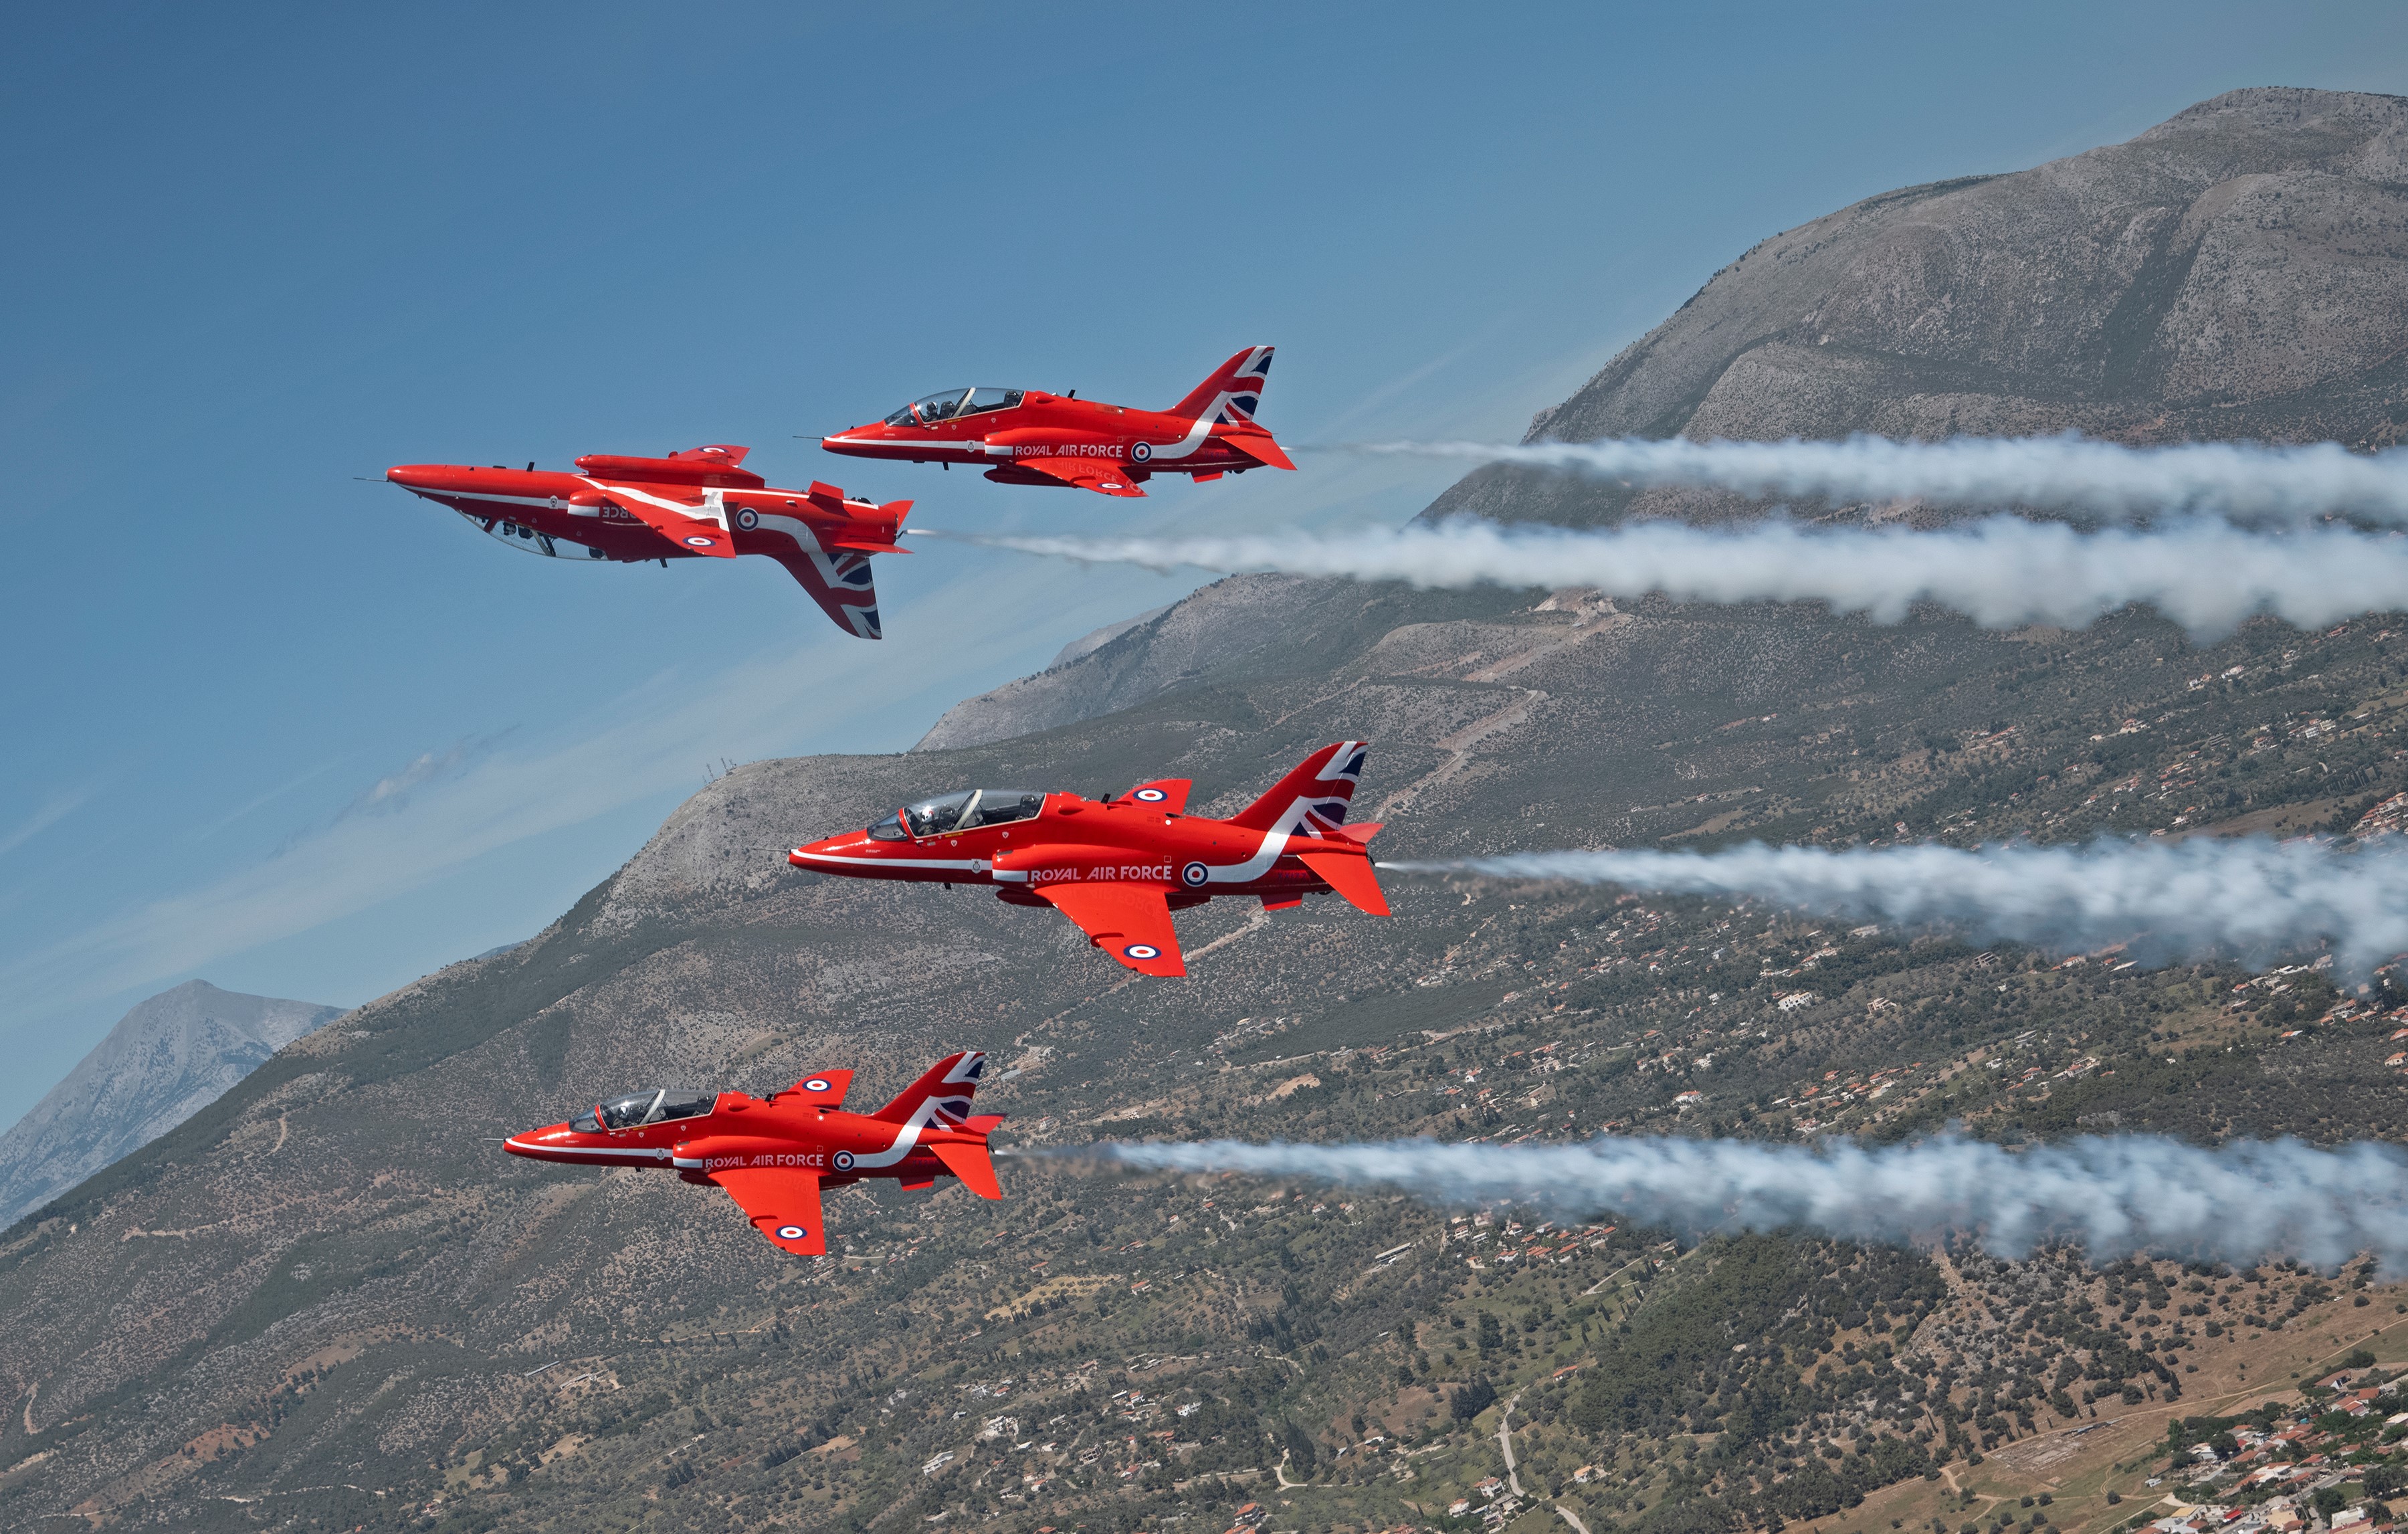 The rear section, including Reds 6 and 9, in action during 2021.